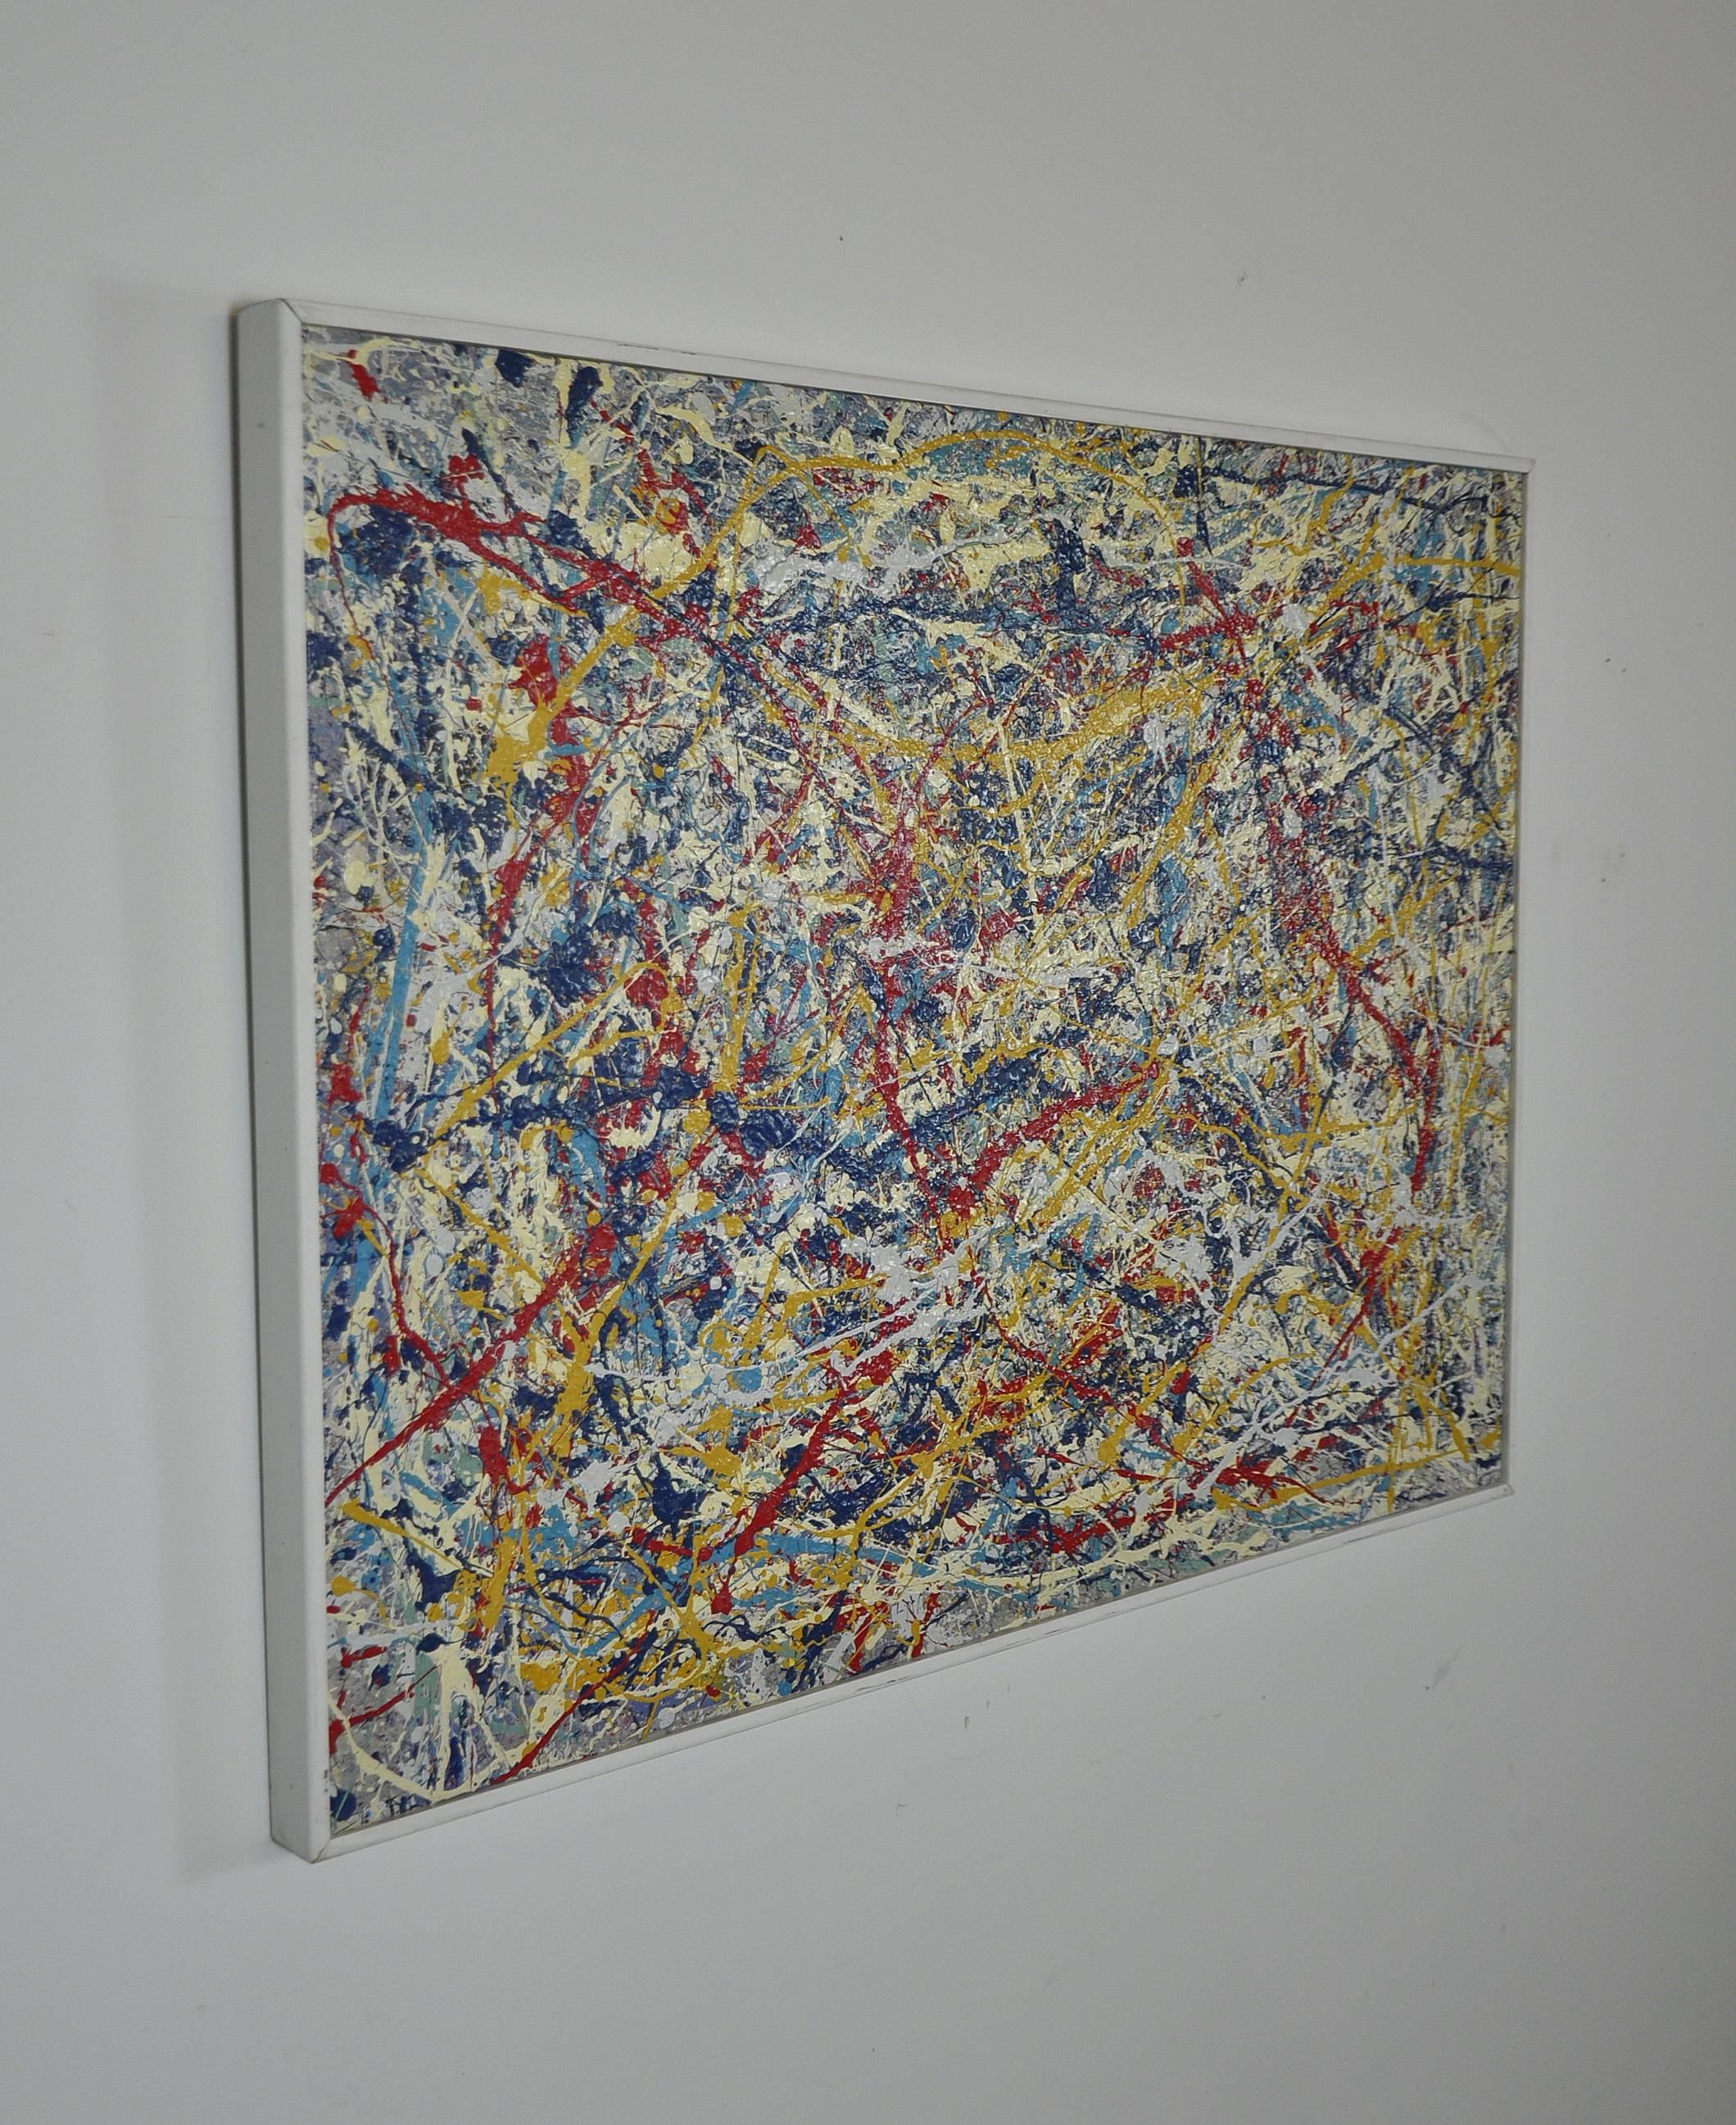 Striking acrylic painting by contemporary artist John Frates (b.1943). Inspired by Jackson Pollock and painted in the Mid-Century Modern abstract expressionist style, the work of art exhibits vivid red, yellow and dark blue paint drips complemented